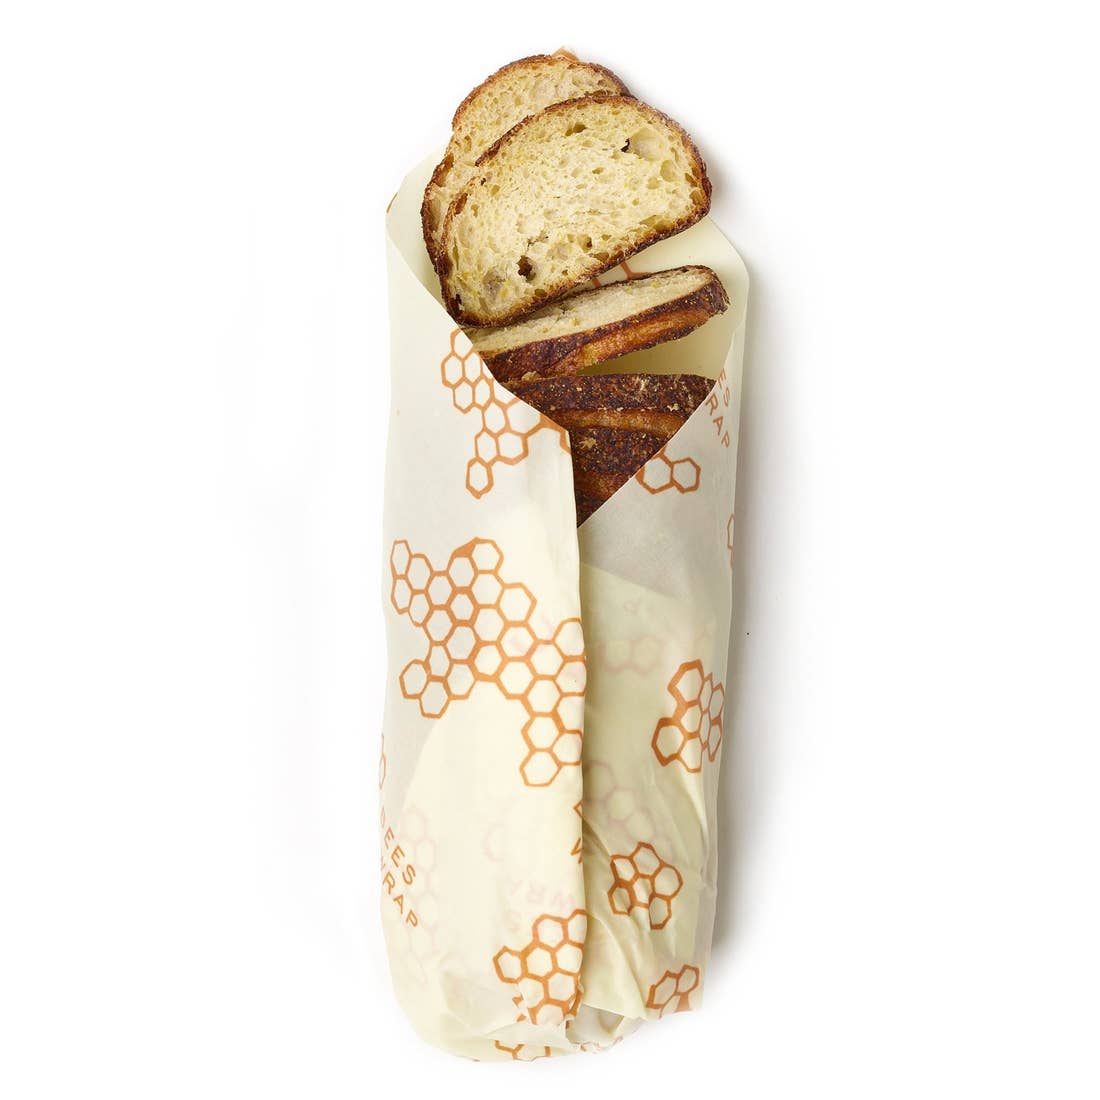 Beeswax Wrap Bread – Gneiss Spice